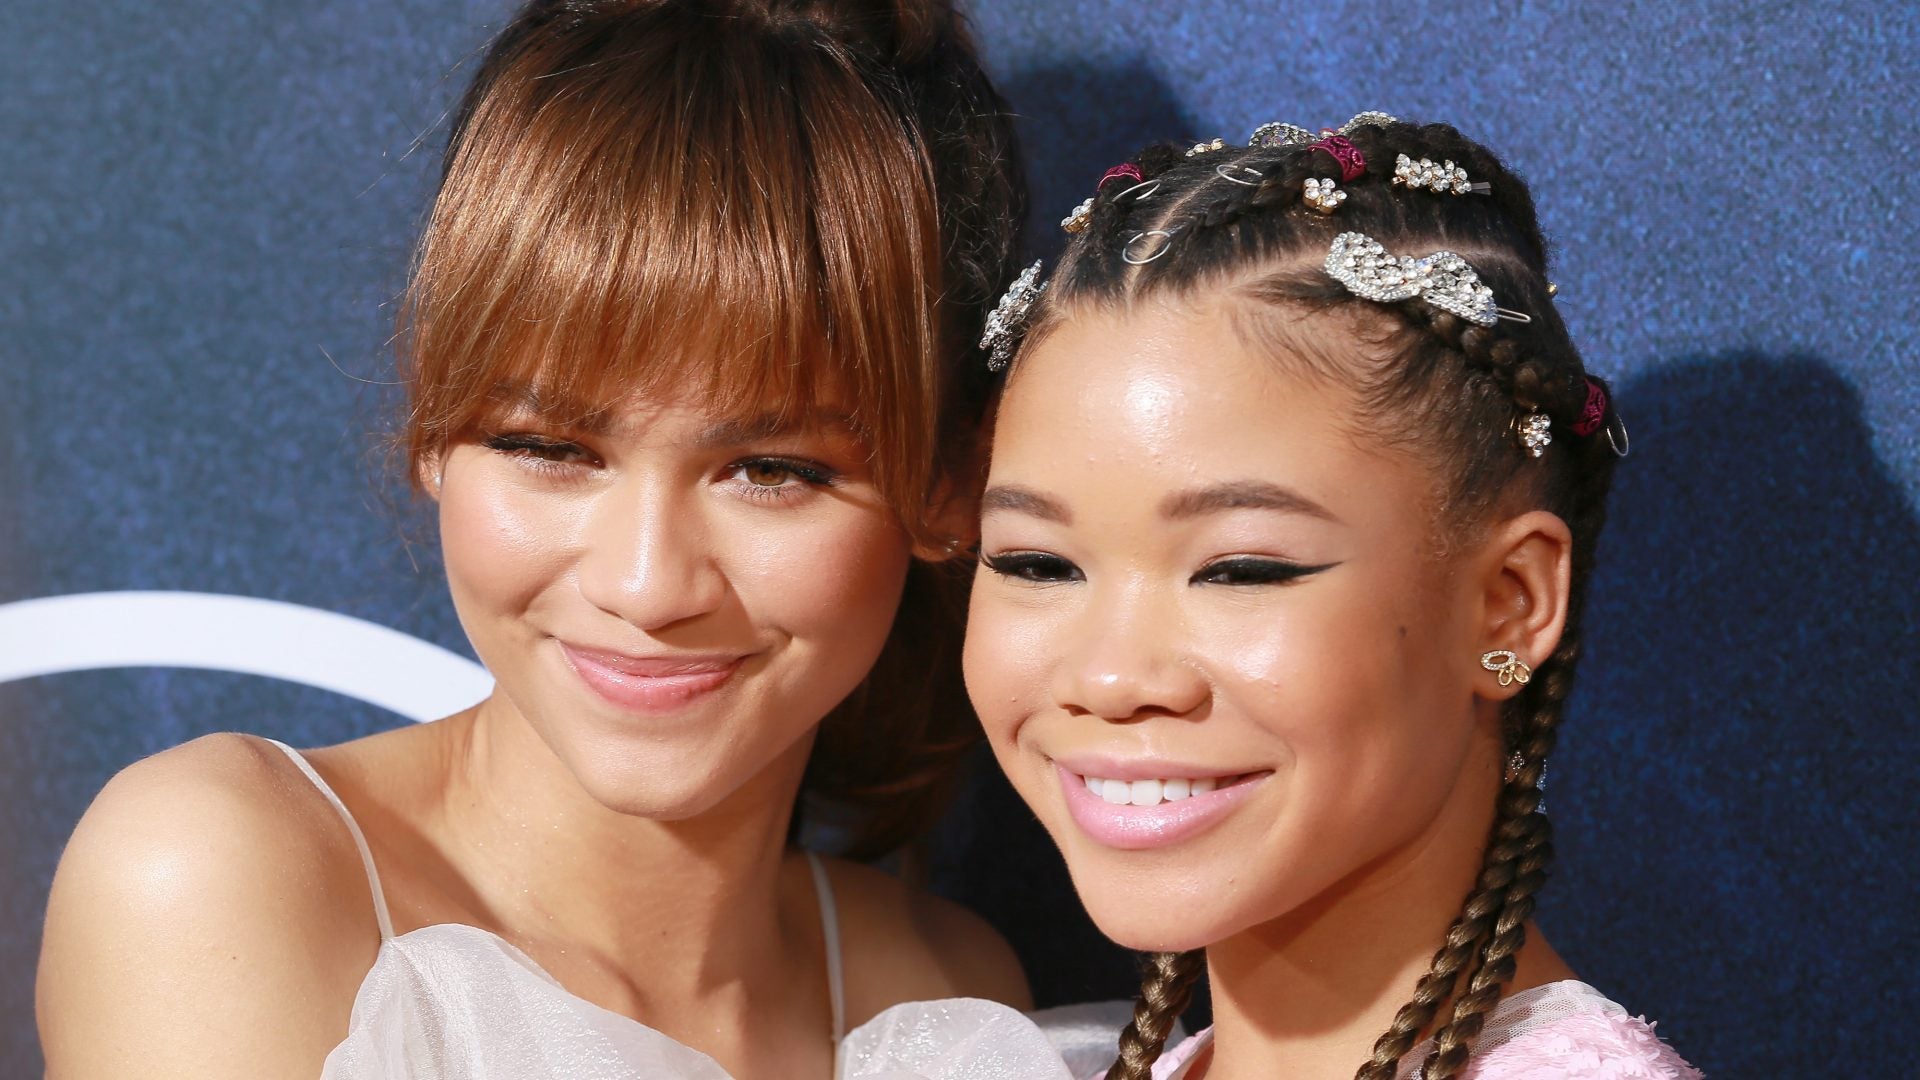 These Videos Of The 'Insecure' Cast & Storm Reid Celebrating Zendaya's Emmy Win Will Make Your Day